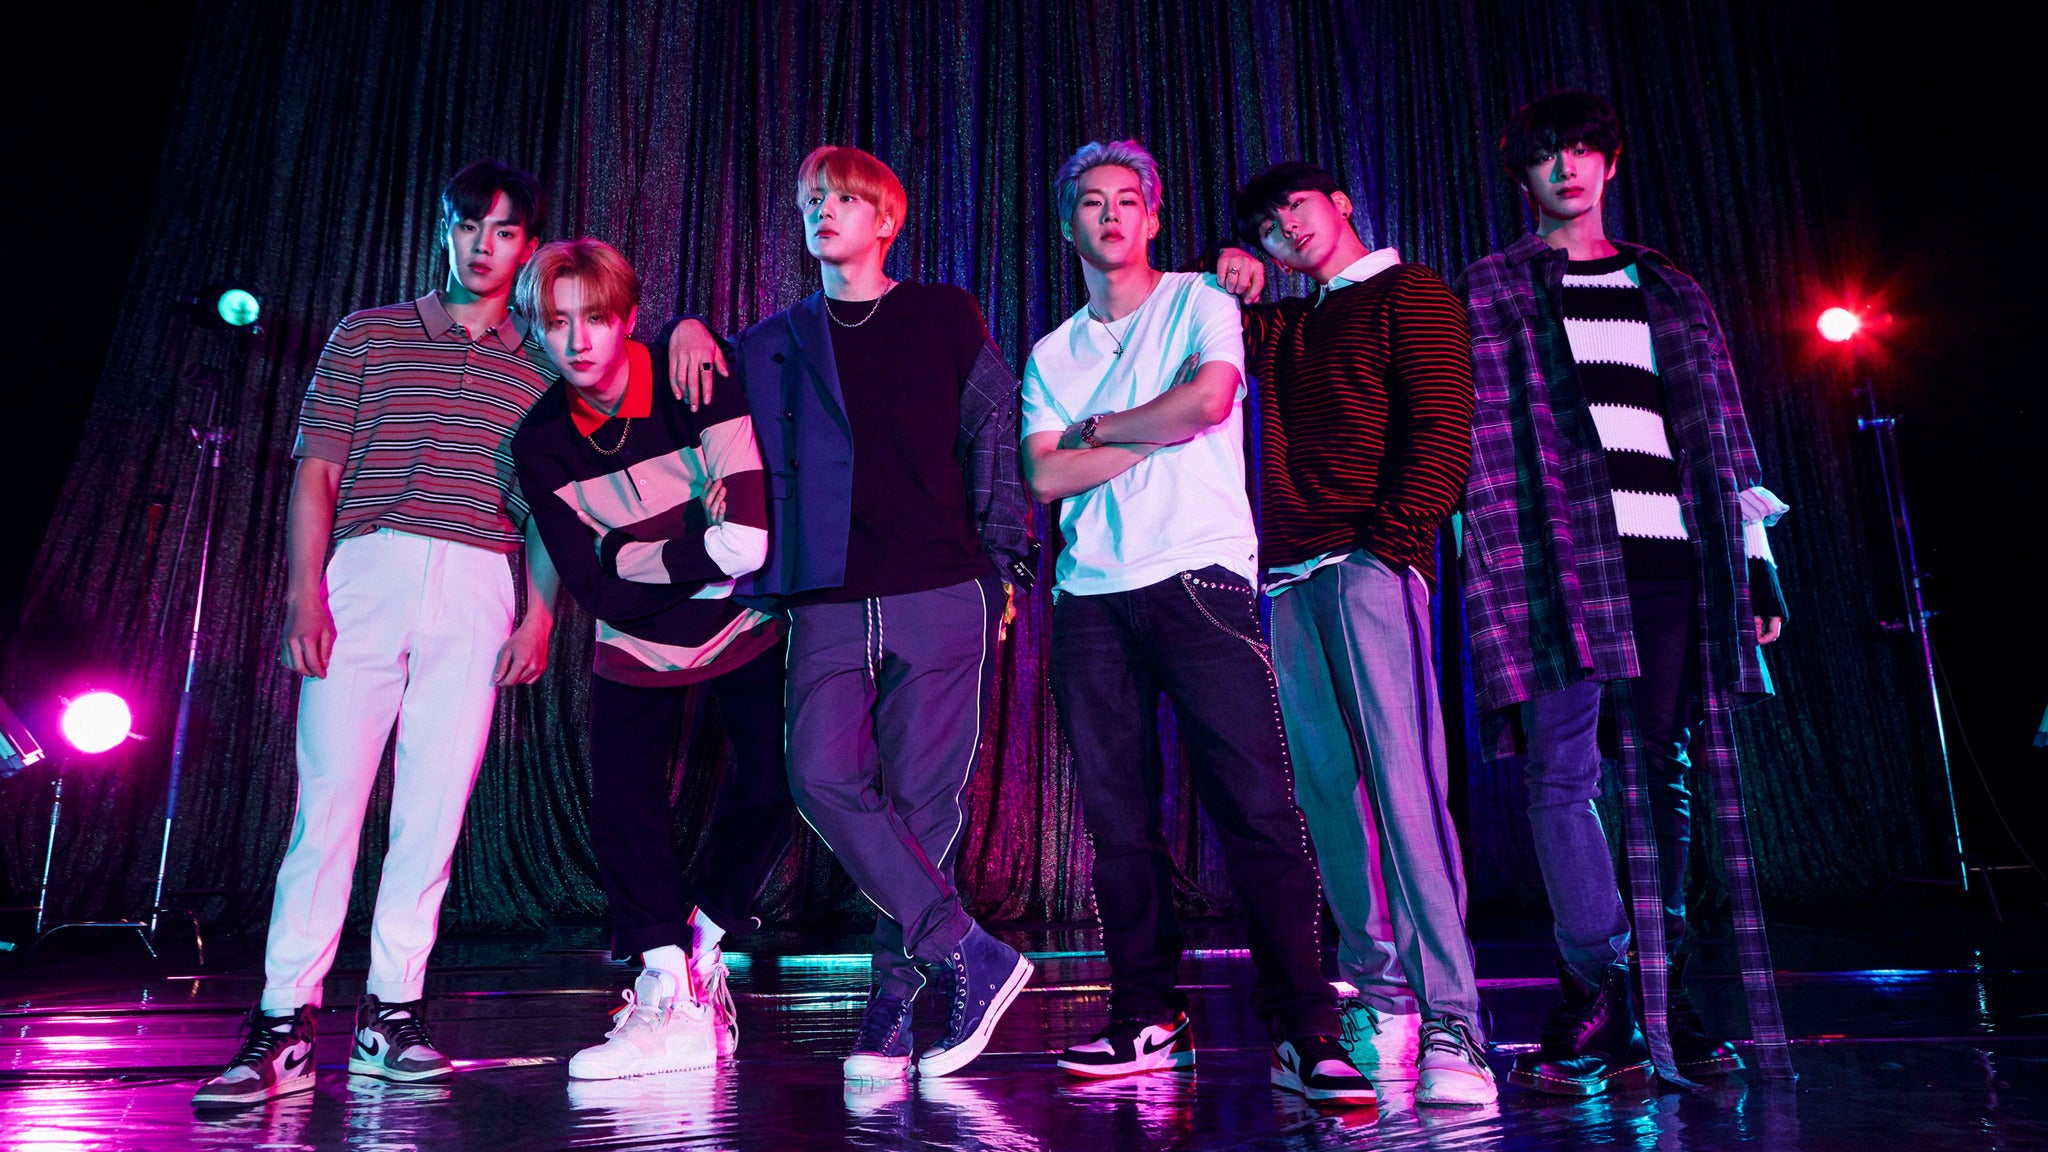 MONSTA X revela video musical para ‘You Can’t Hold My Heart’